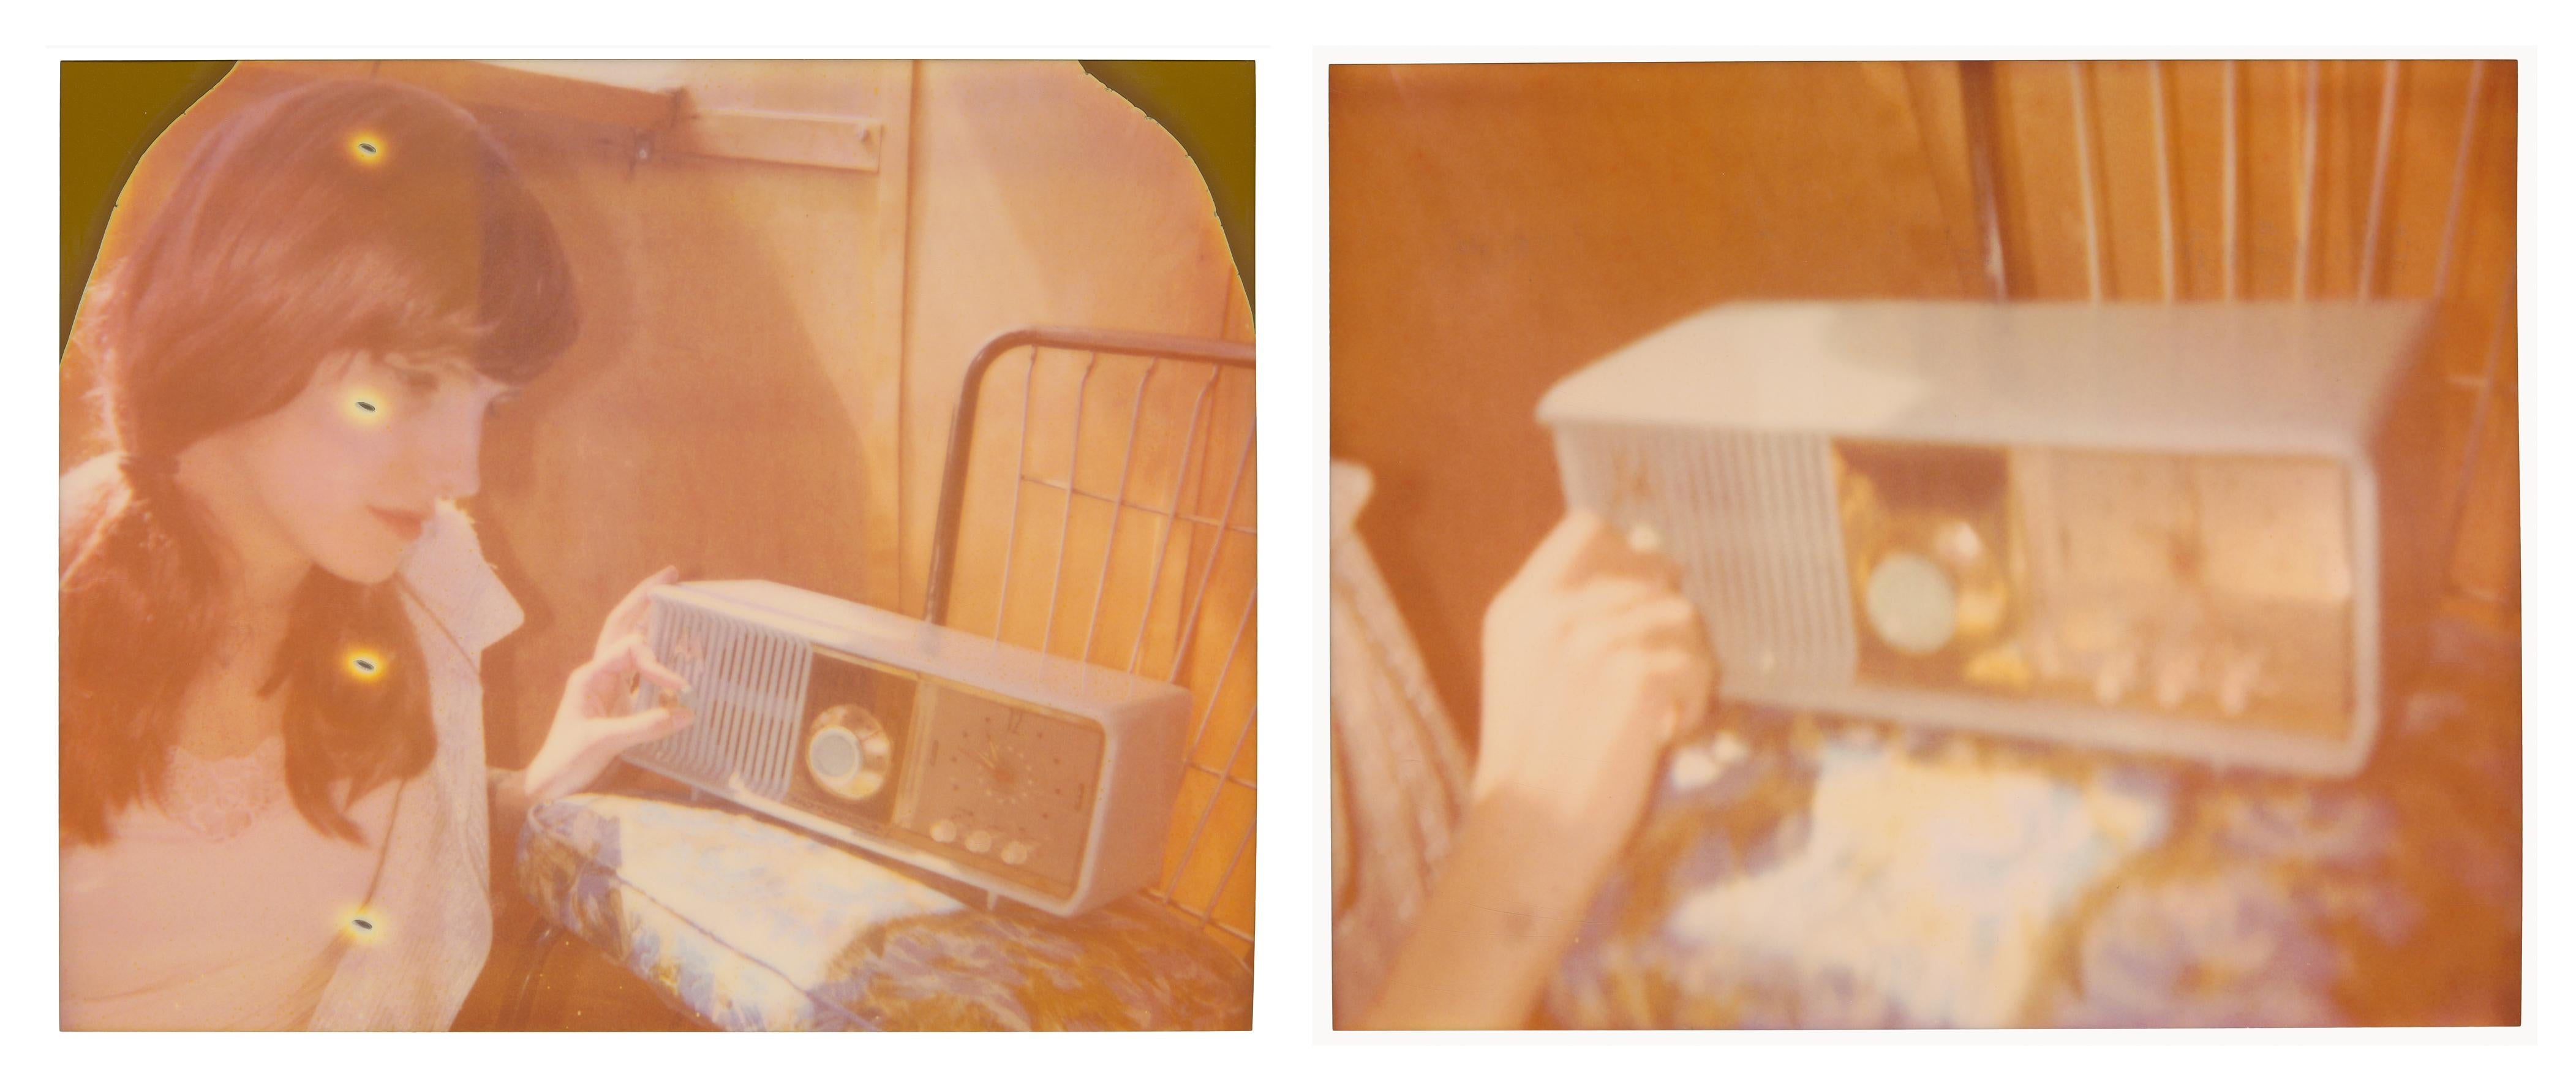 Color Photograph Stefanie Schneider - Radio Show (The Girl behind the White Picket Fence) - diptyque